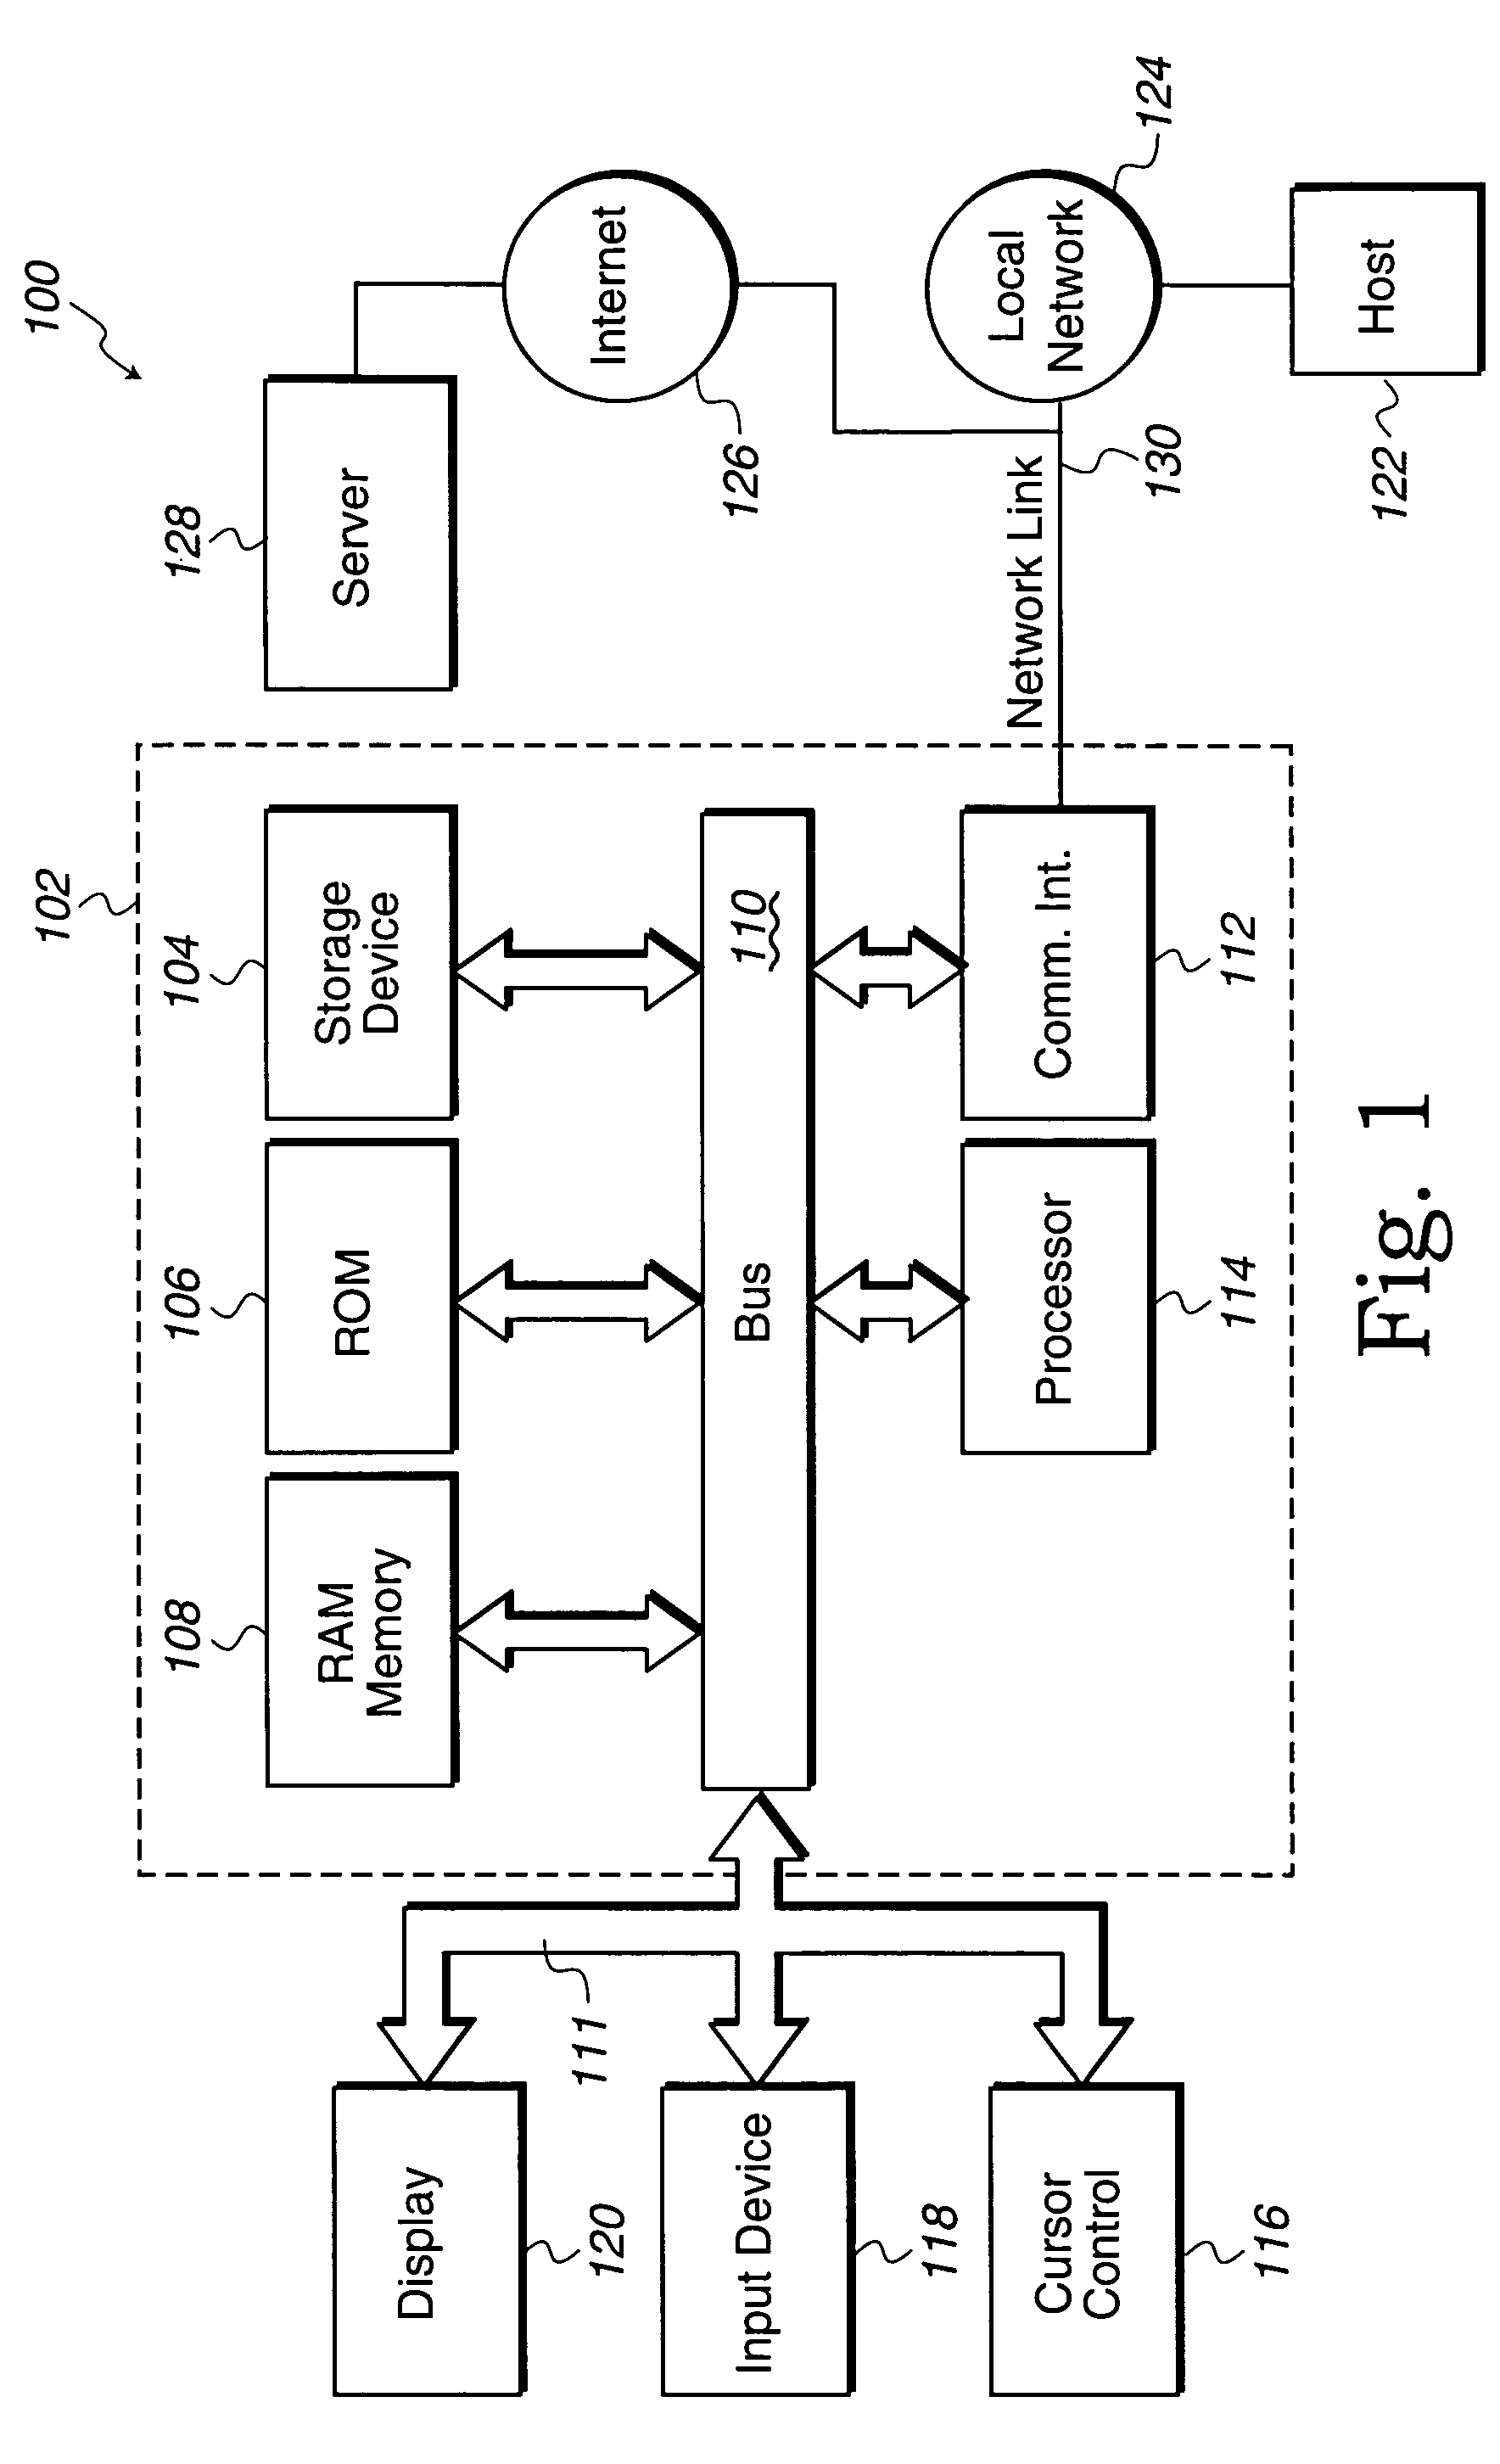 Method and system for detecting deprecated elements during runtime